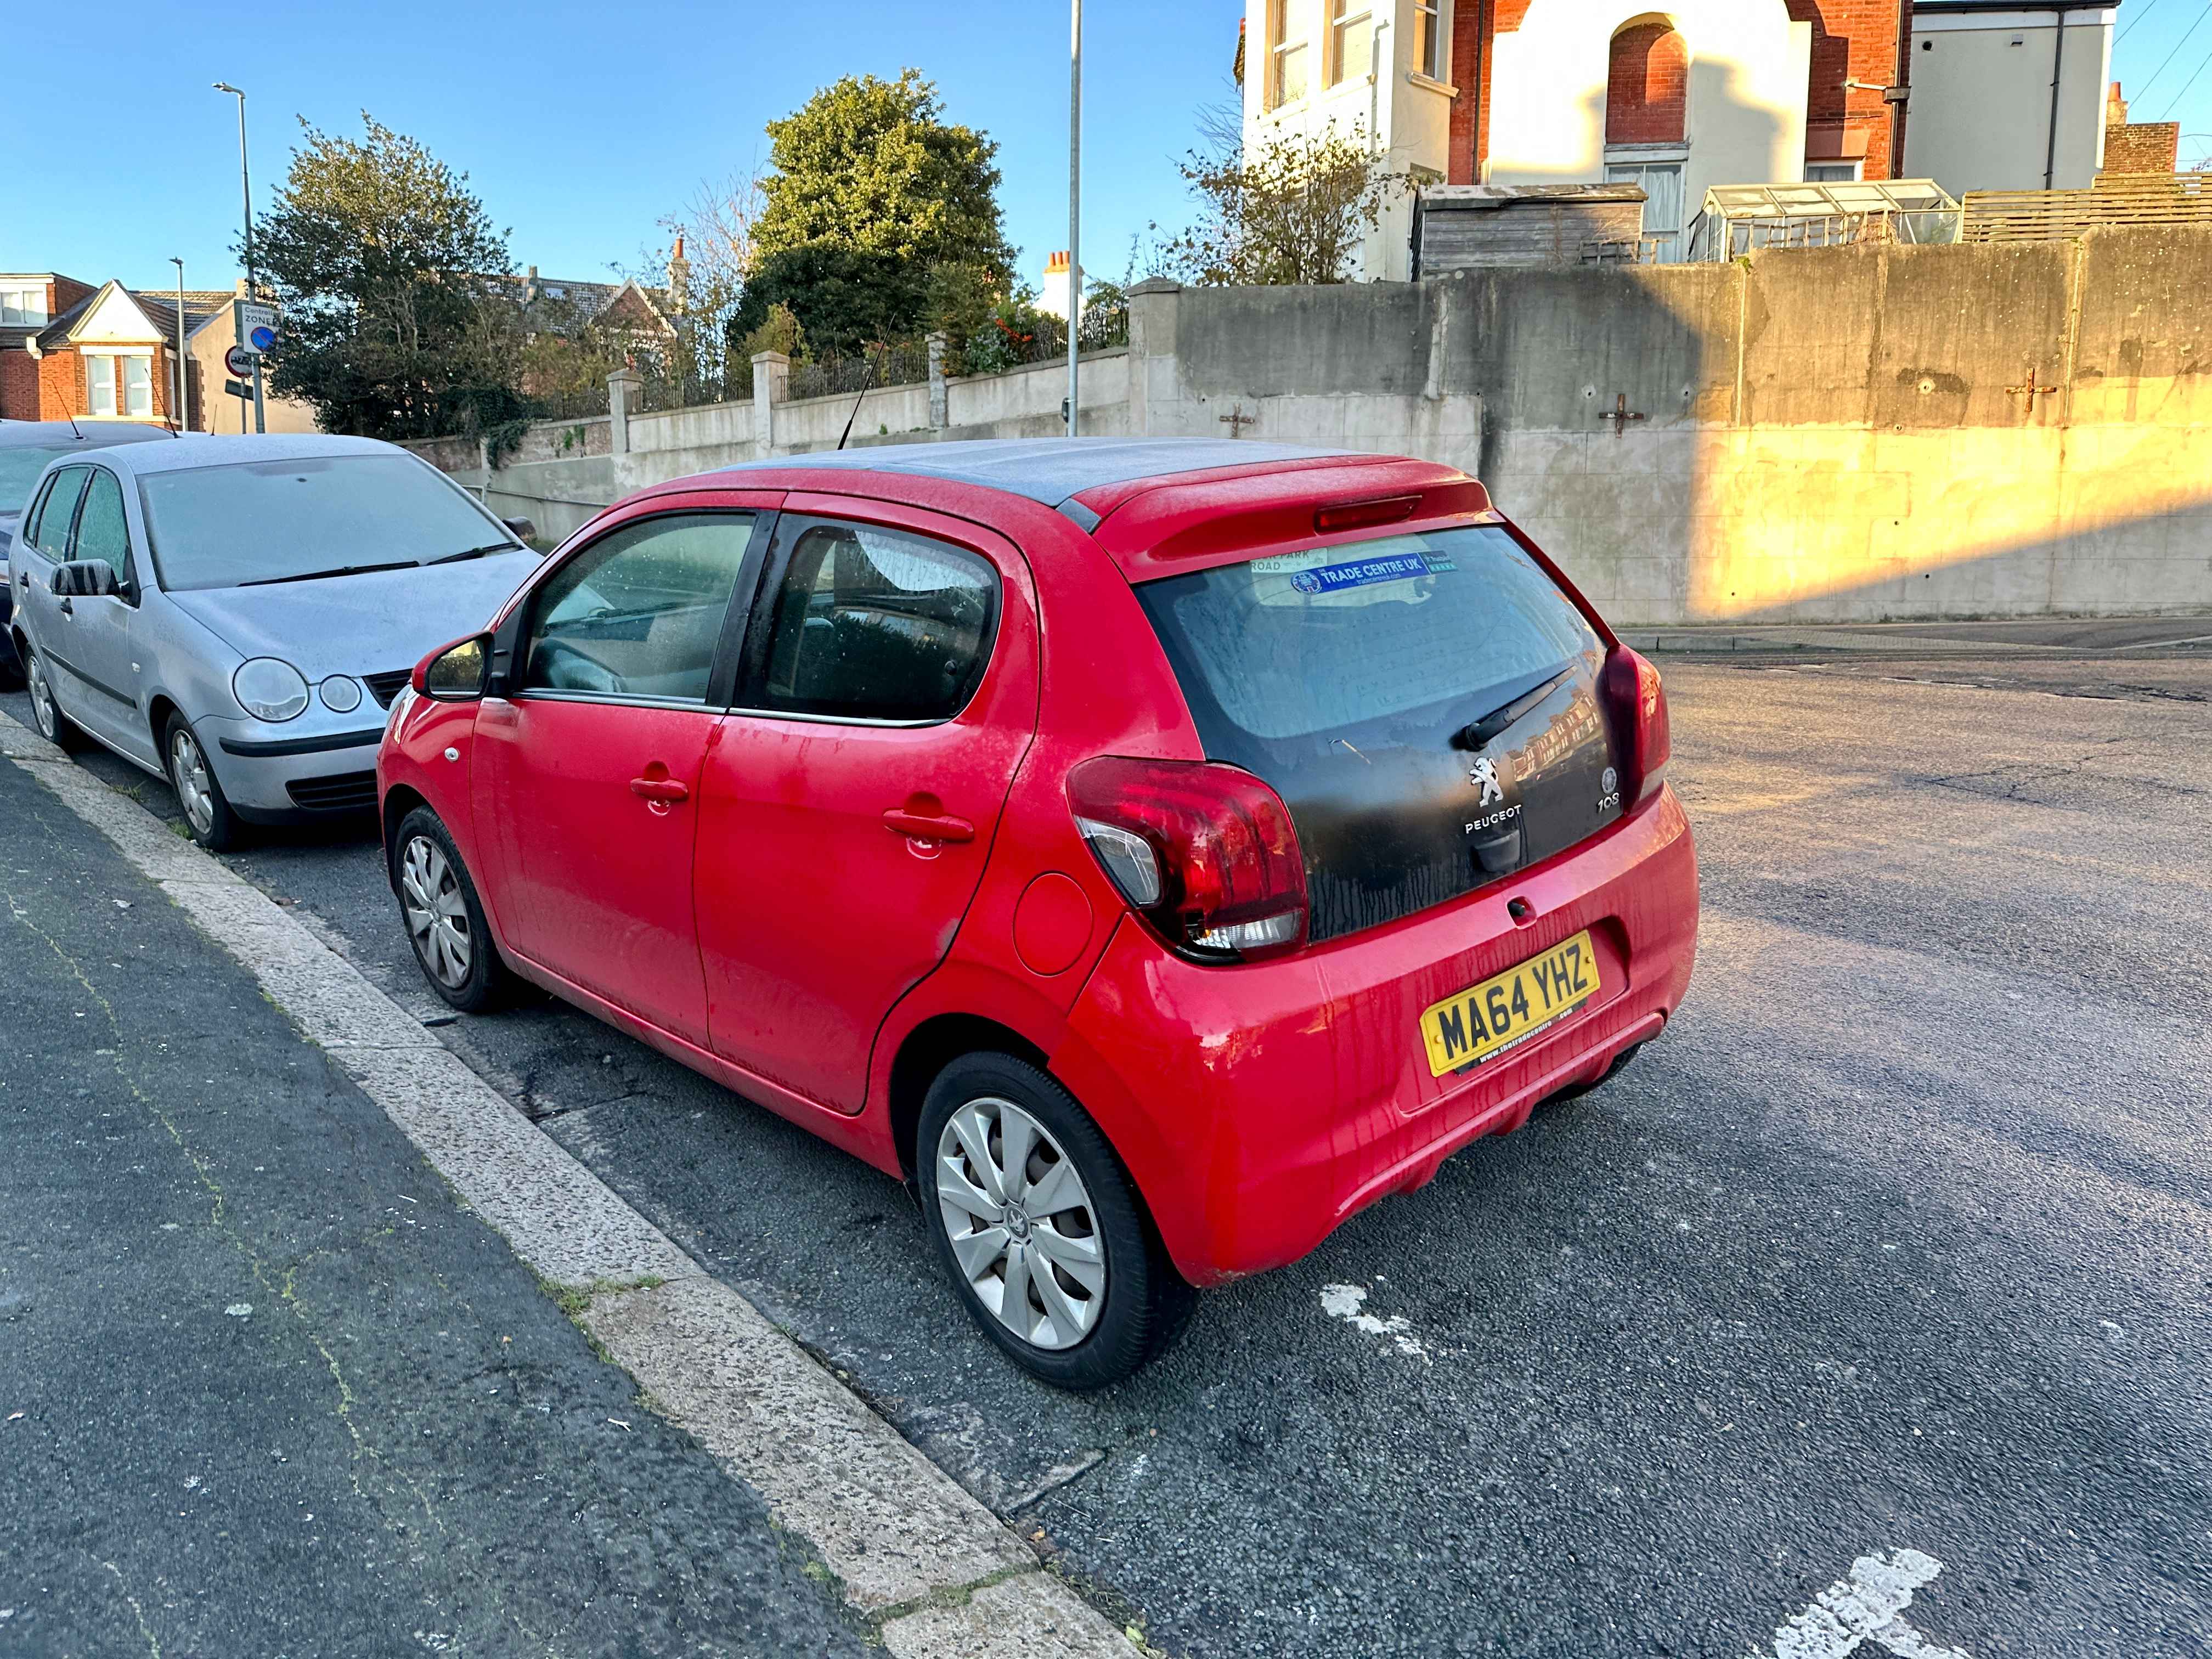 Photograph of MA64 YHZ - a Red Peugeot 108 parked in Hollingdean by a non-resident who uses the local area as part of their Brighton commute. The first of four photographs supplied by the residents of Hollingdean.